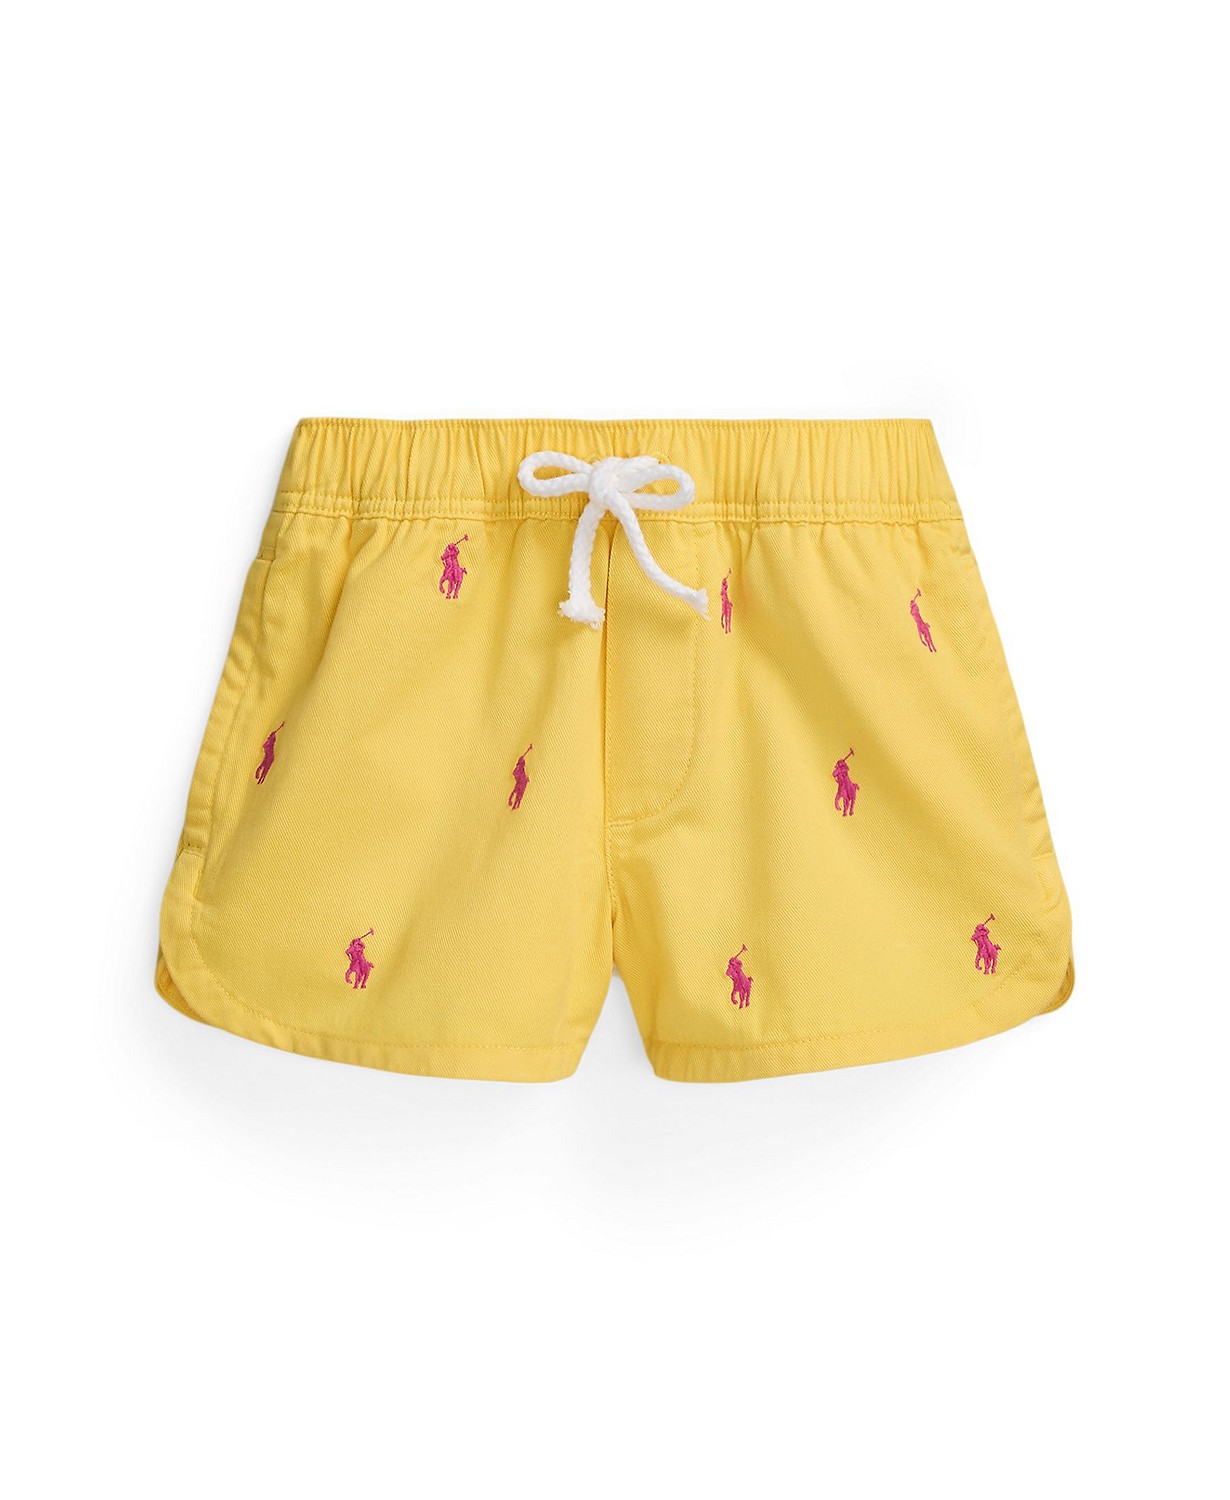 Toddler and Little Girls Polo Pony Cotton Twill Shorts